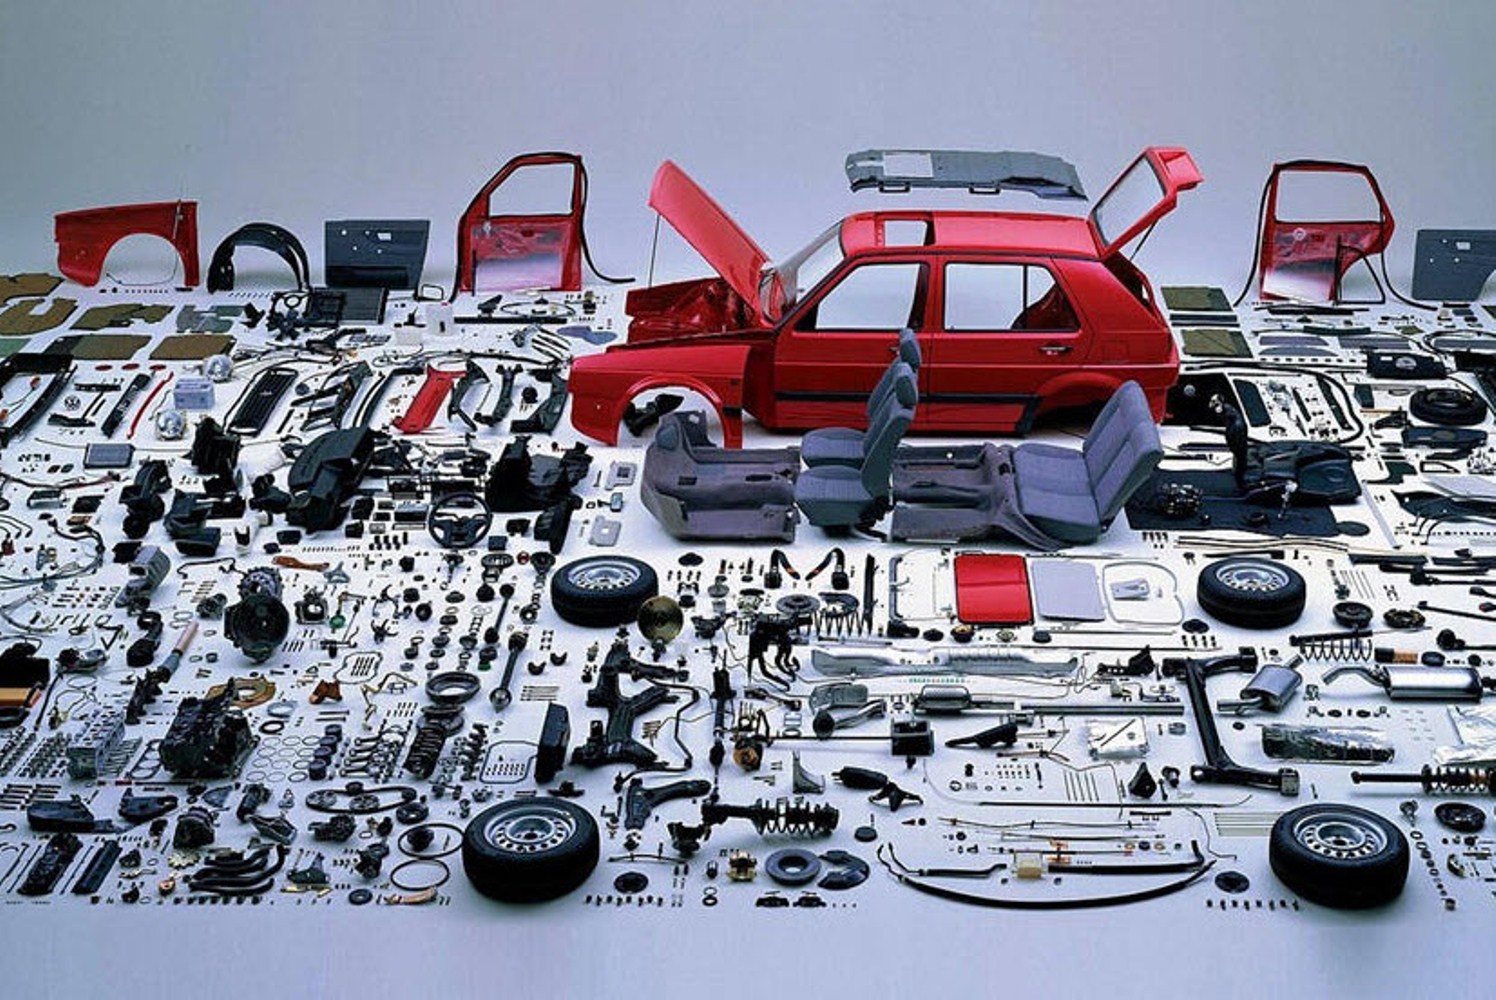 A car is produced from about 30,000 individual parts